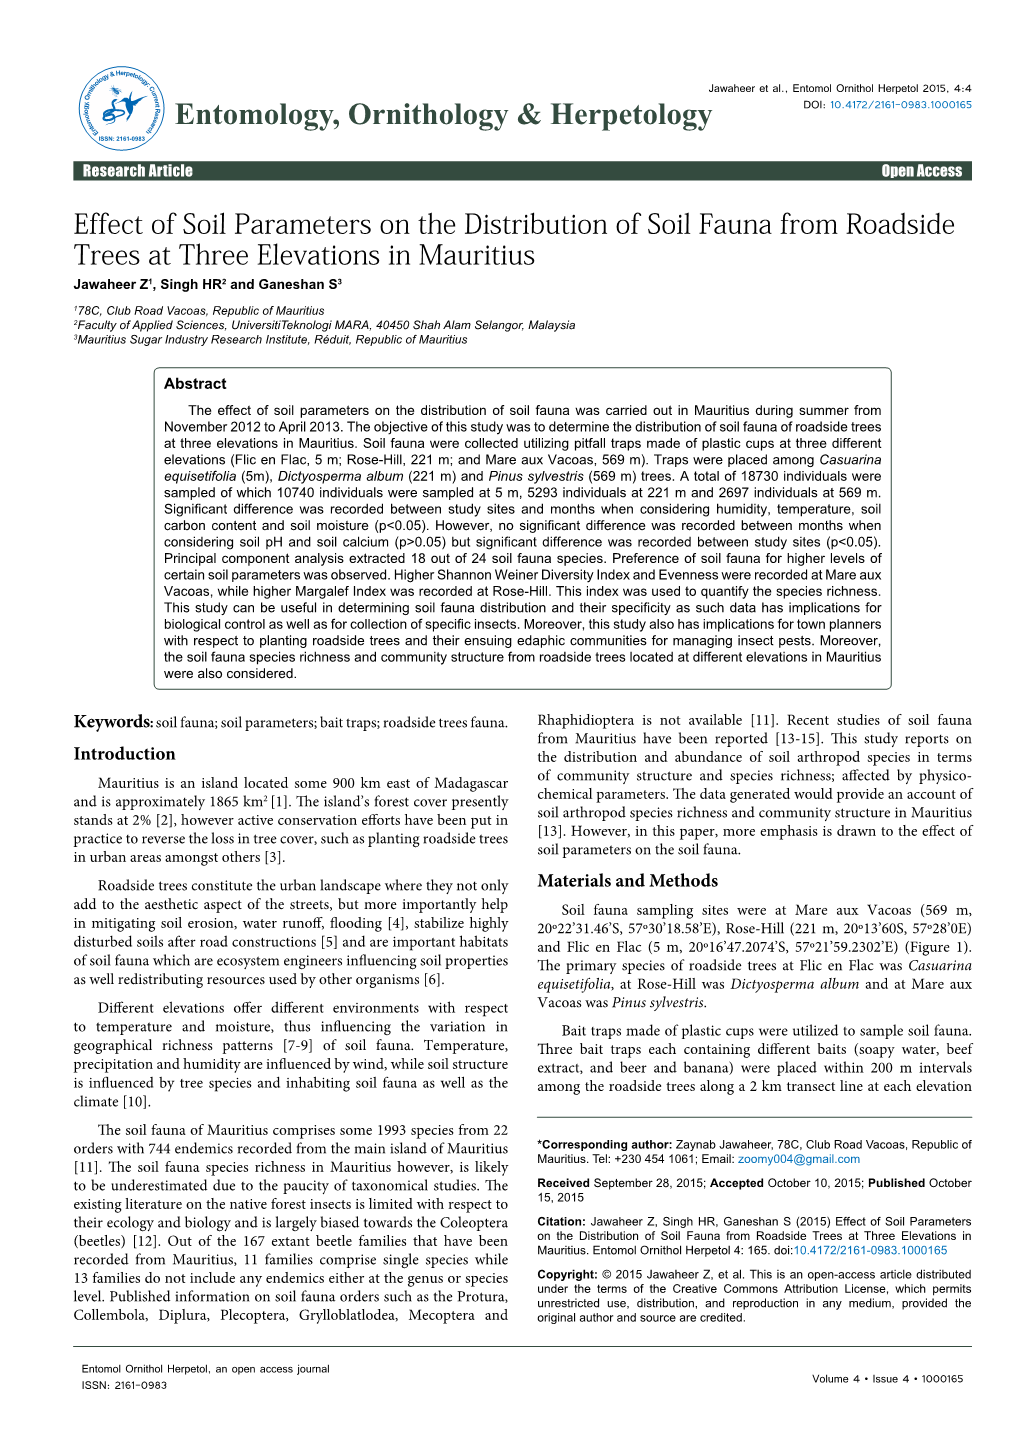 Effect of Soil Parameters on the Distribution of Soil Fauna from Roadside Trees at Three Elevations in Mauritius Jawaheer Z1, Singh HR2 and Ganeshan S3